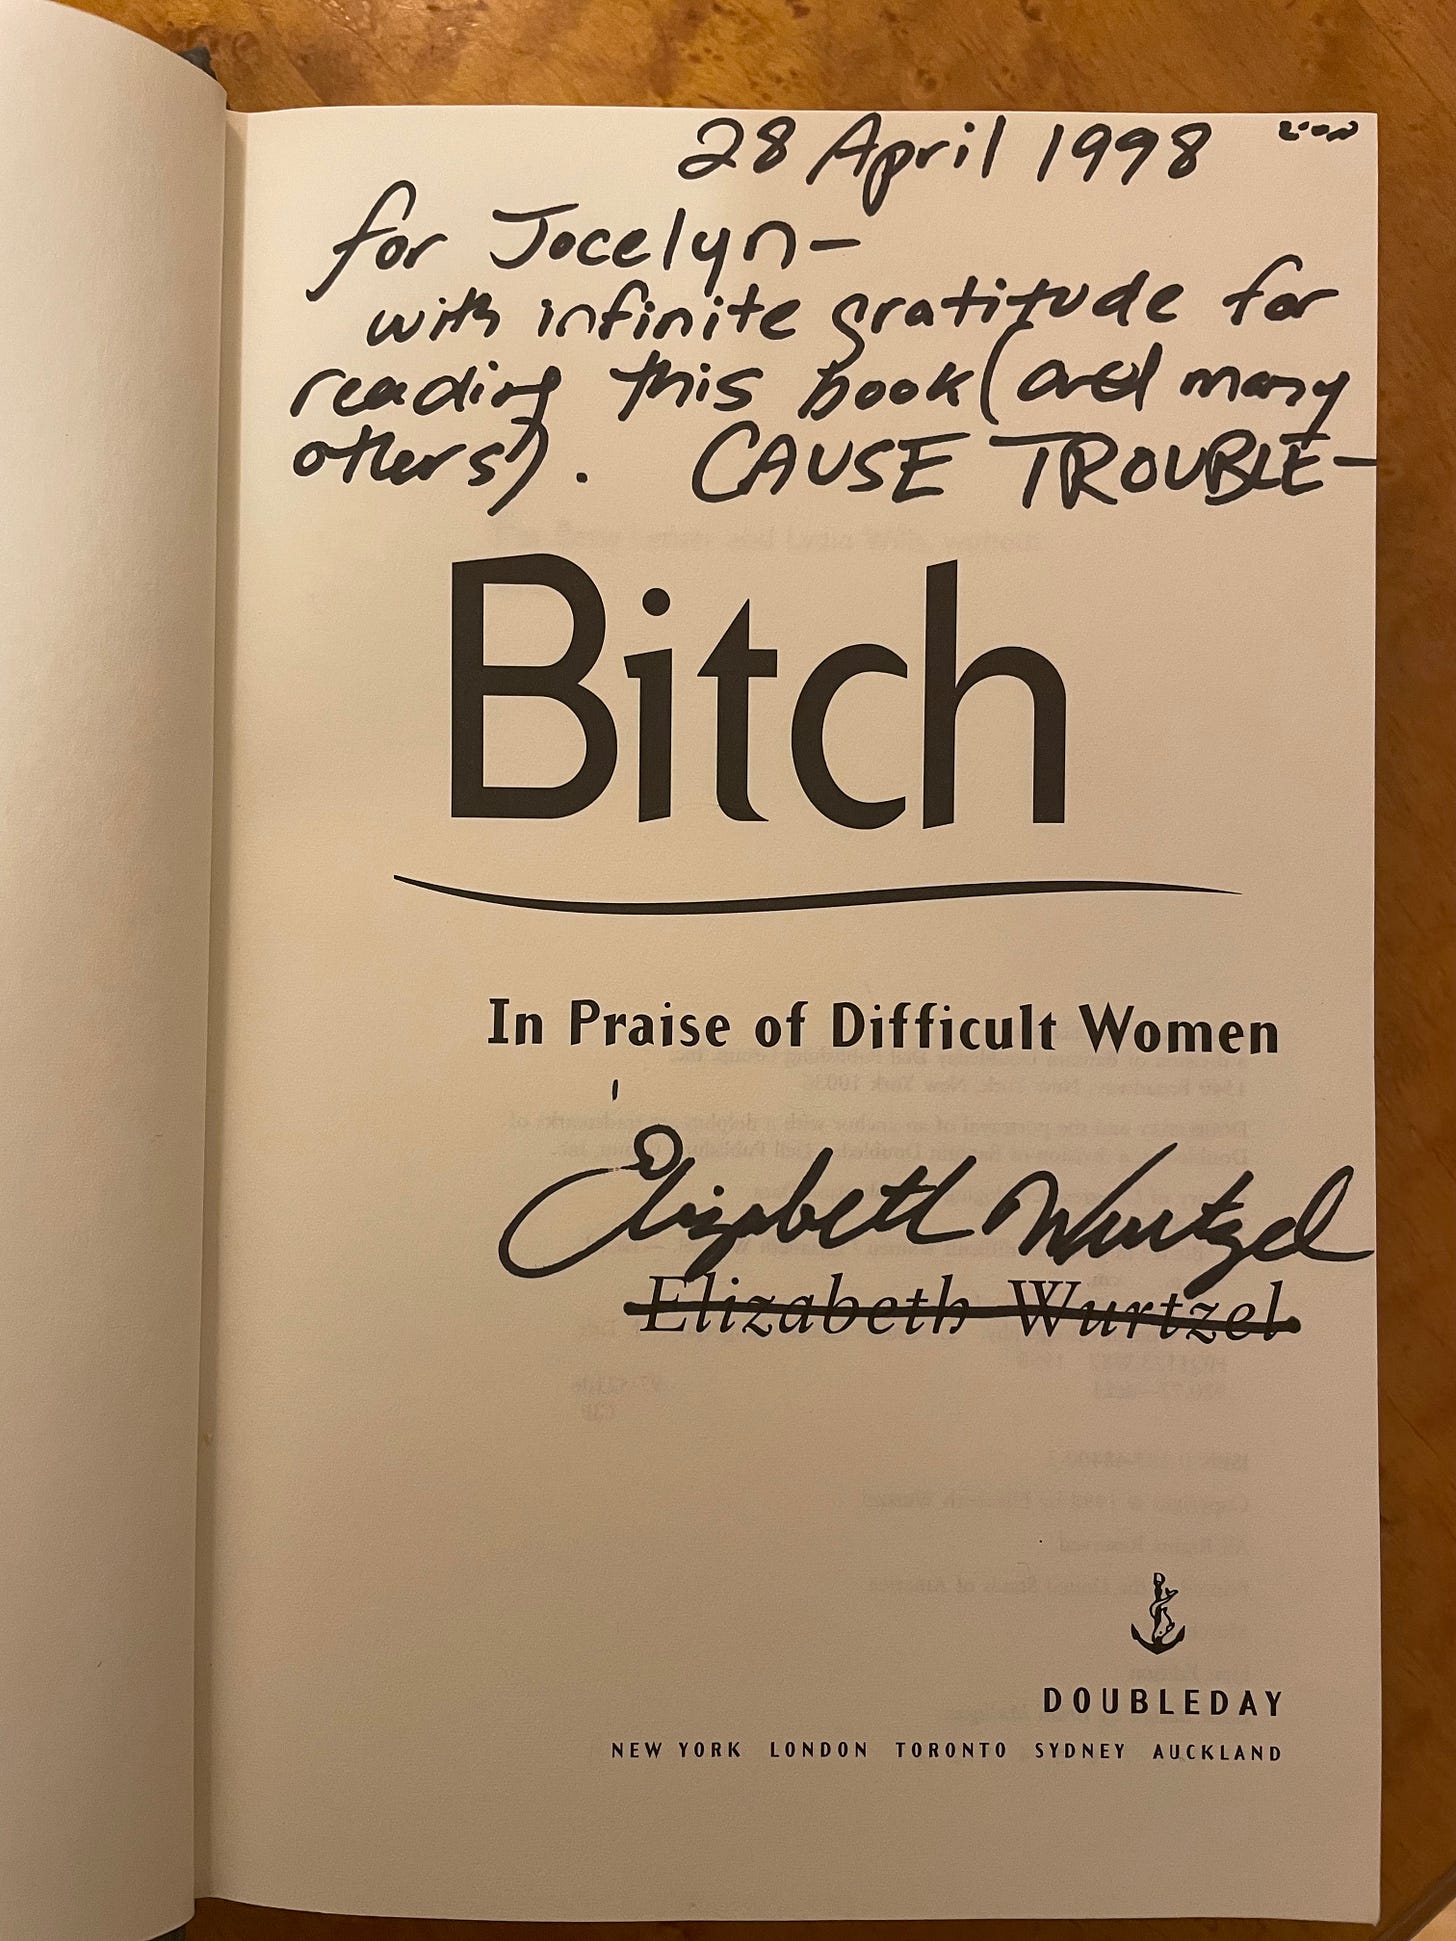 Autograph by Elizabeth Wurtzel that reads: For Jocelyn-- with infinite gratitude for reading this book (and many others). CAUSE TROUBLE. 